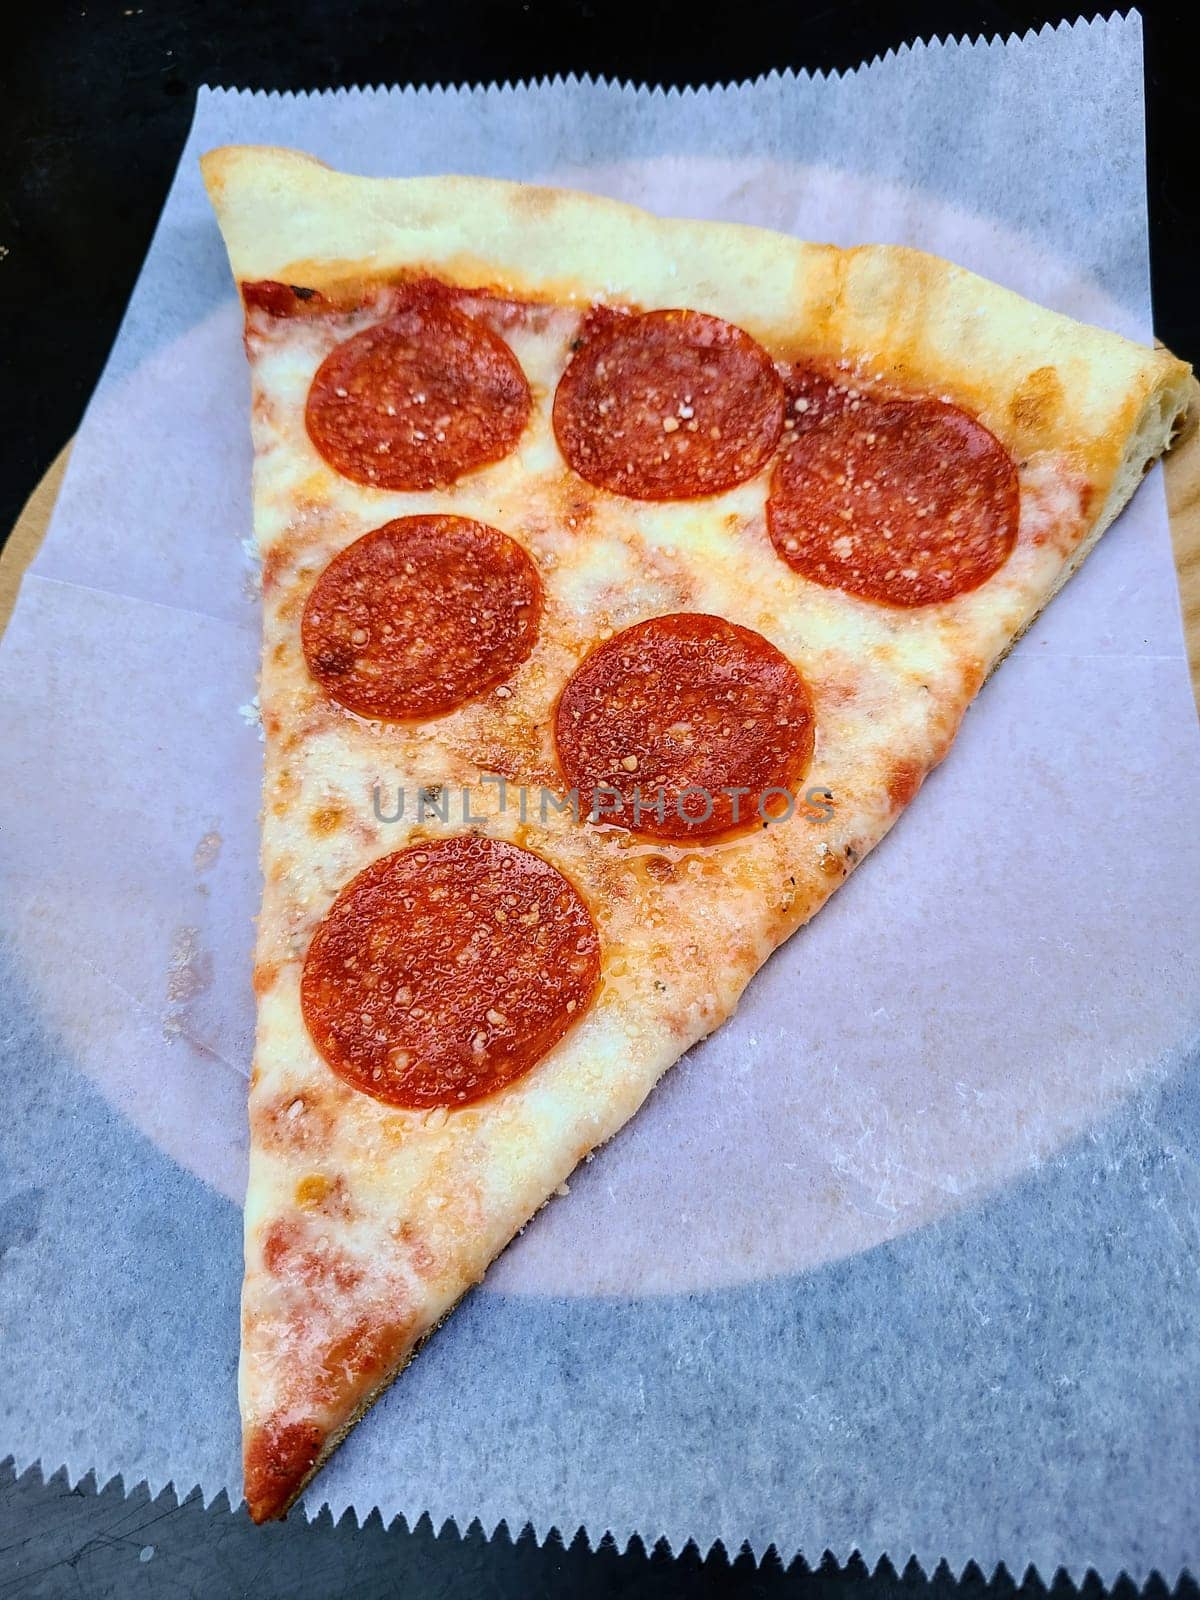 Freshly baked pepperoni pizza slice on parchment paper in New York City restaurant, 2022 - perfect for culinary and fast food concepts.